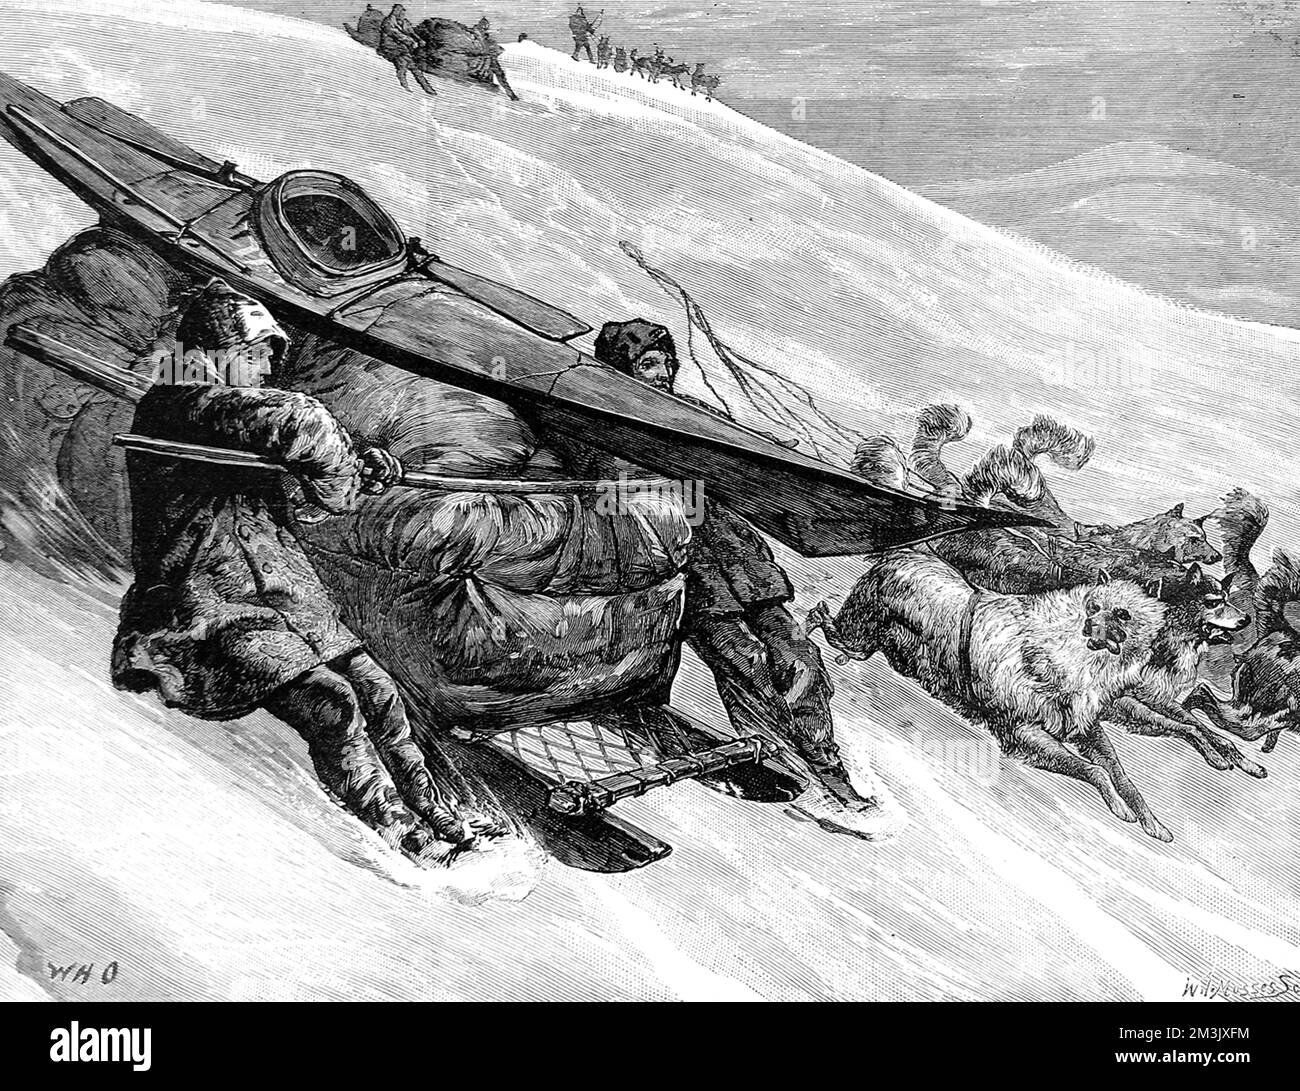 A sledge party of the American Franklin Search Expedition of 1878-1880, speeding down a steep slope, 15th April 1879. This expedition was one of many to search the Arctic for signs of Sir John Franklin's ill-fated Arctic expedition of 1845.  In 1845 the British Admiralty sent two polar exploration ships, HMS 'Erebus' and HMS 'Terror', to look for the Northwest passage round the northern coast of Canada. The expedition, commanded by Sir John Franklin, disappeared from view late in 1845 and none of the men were ever seen again.   In fact the ships made it to the King William Island region, Stock Photo